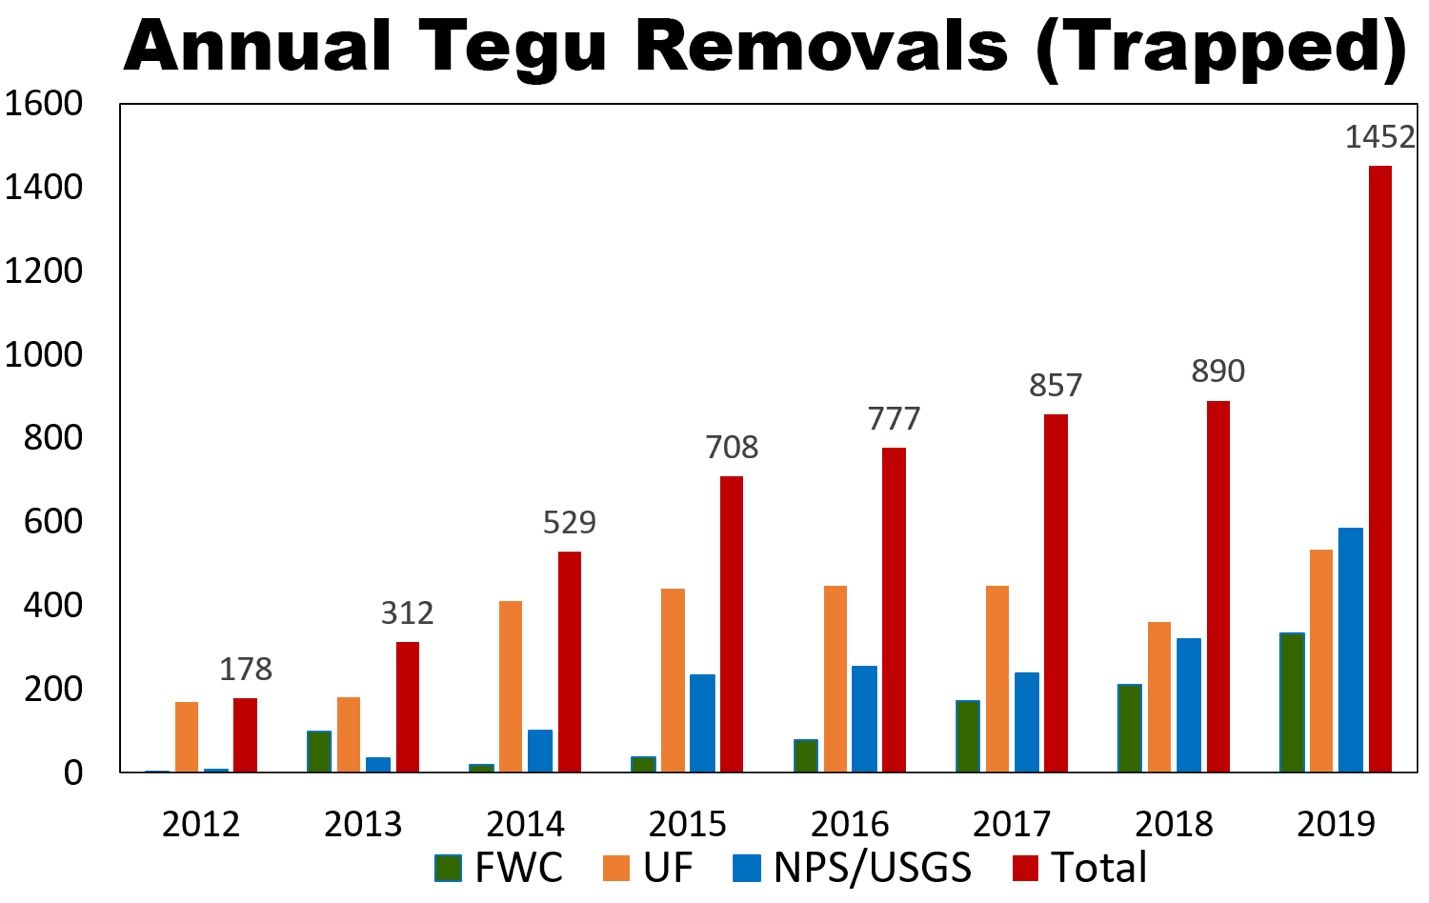 Tegus removed by year (2012–2019) by Florida Fish and Wildlife Conservation Commission (FWC), University of Florida (UF), National Park Service (NPS) and United States Geological Survey (USGS) through trapping. 